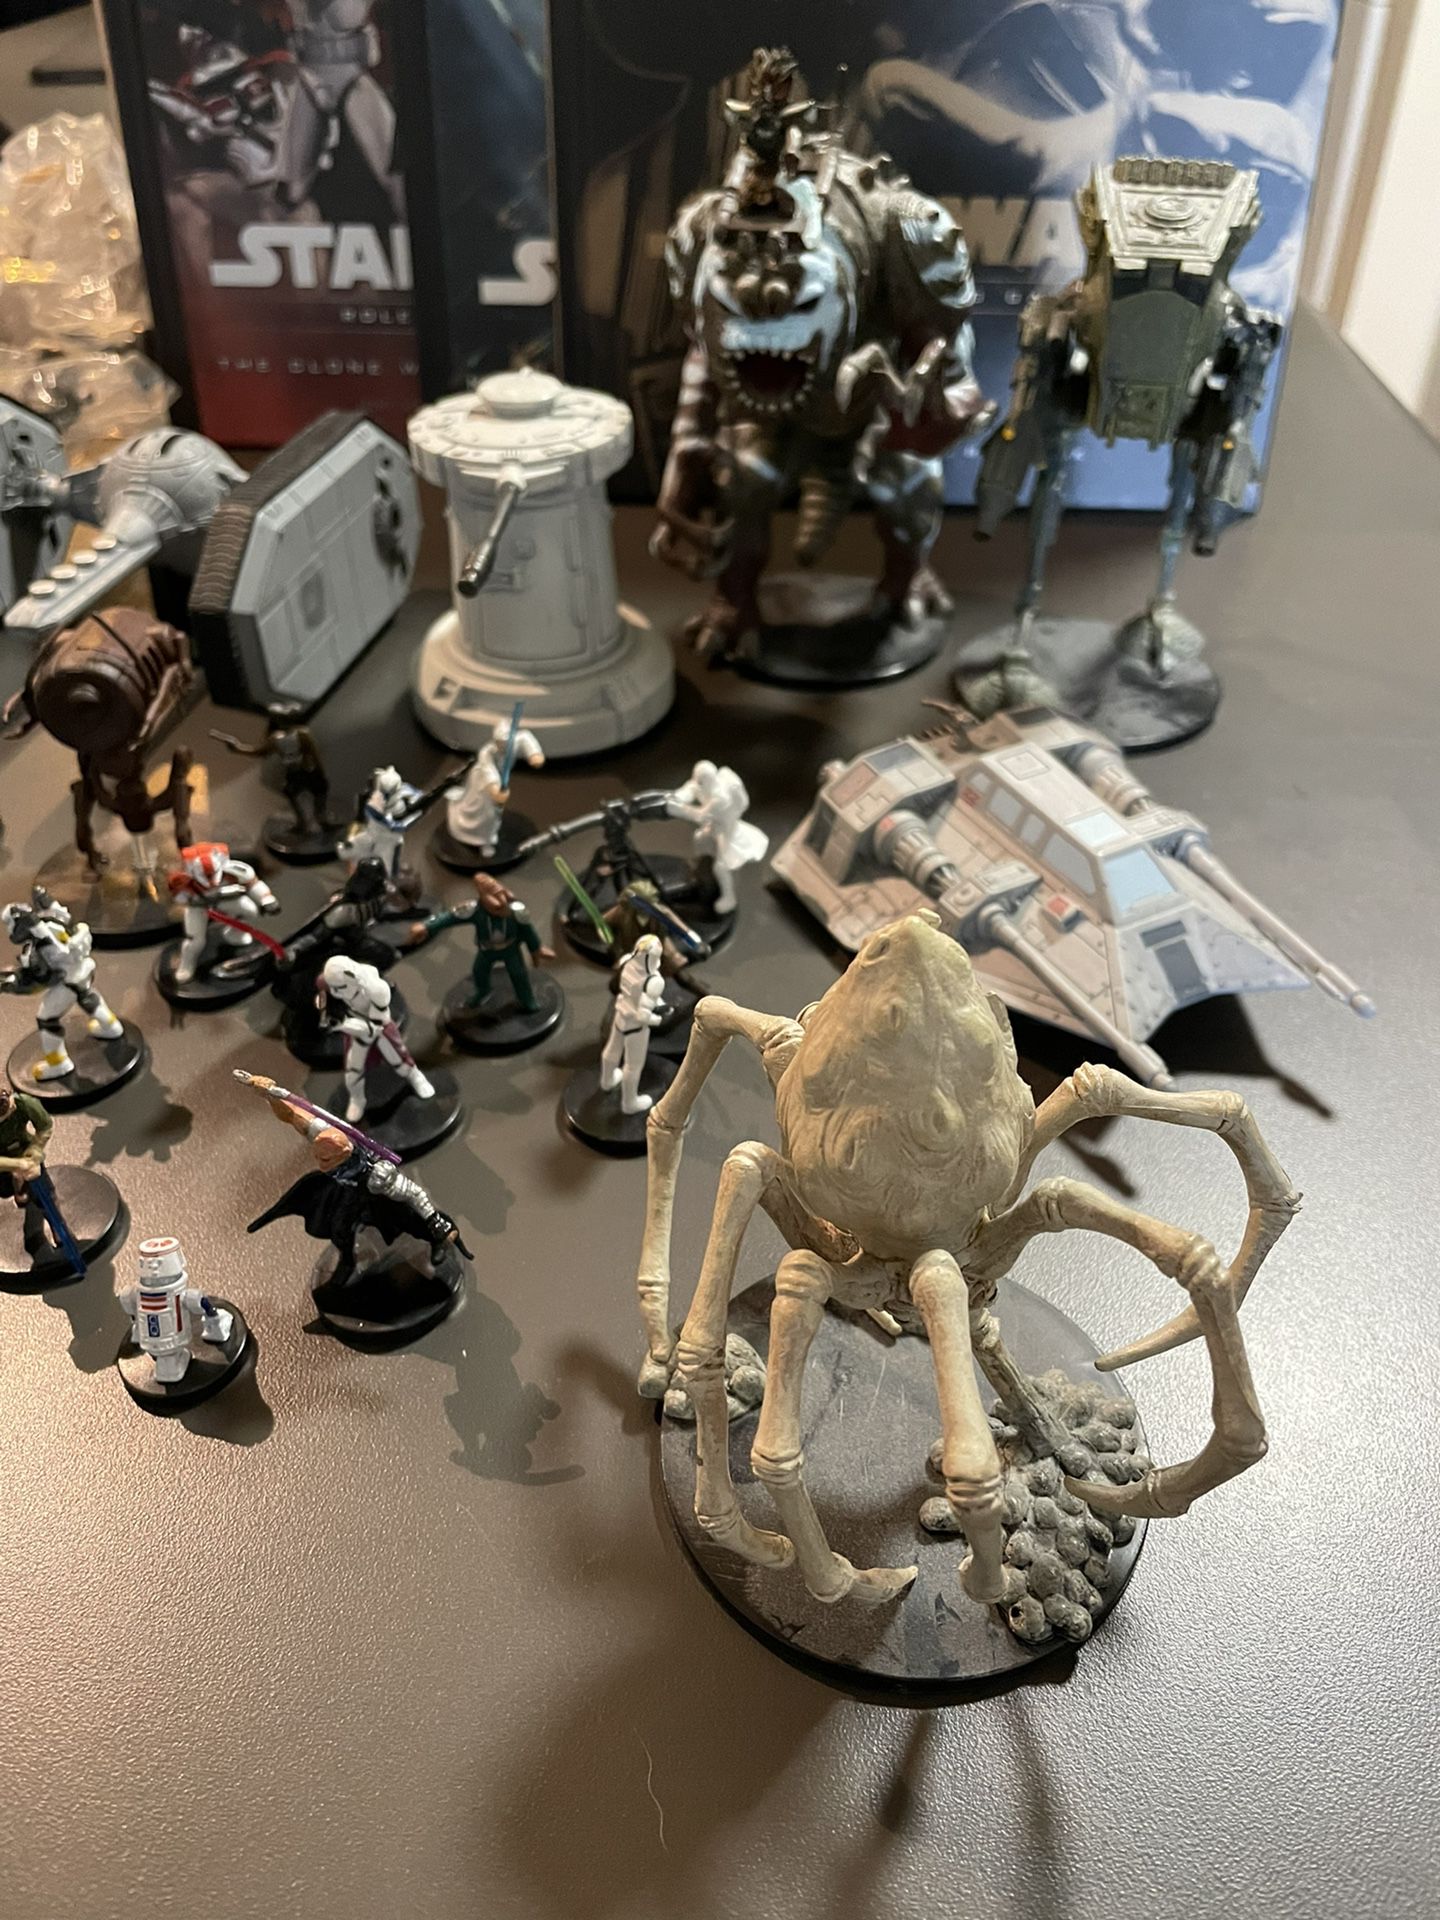 Original First Printing, Star Wars Role-Playing game From West End Games  for Sale in Anacortes, Washington - OfferUp